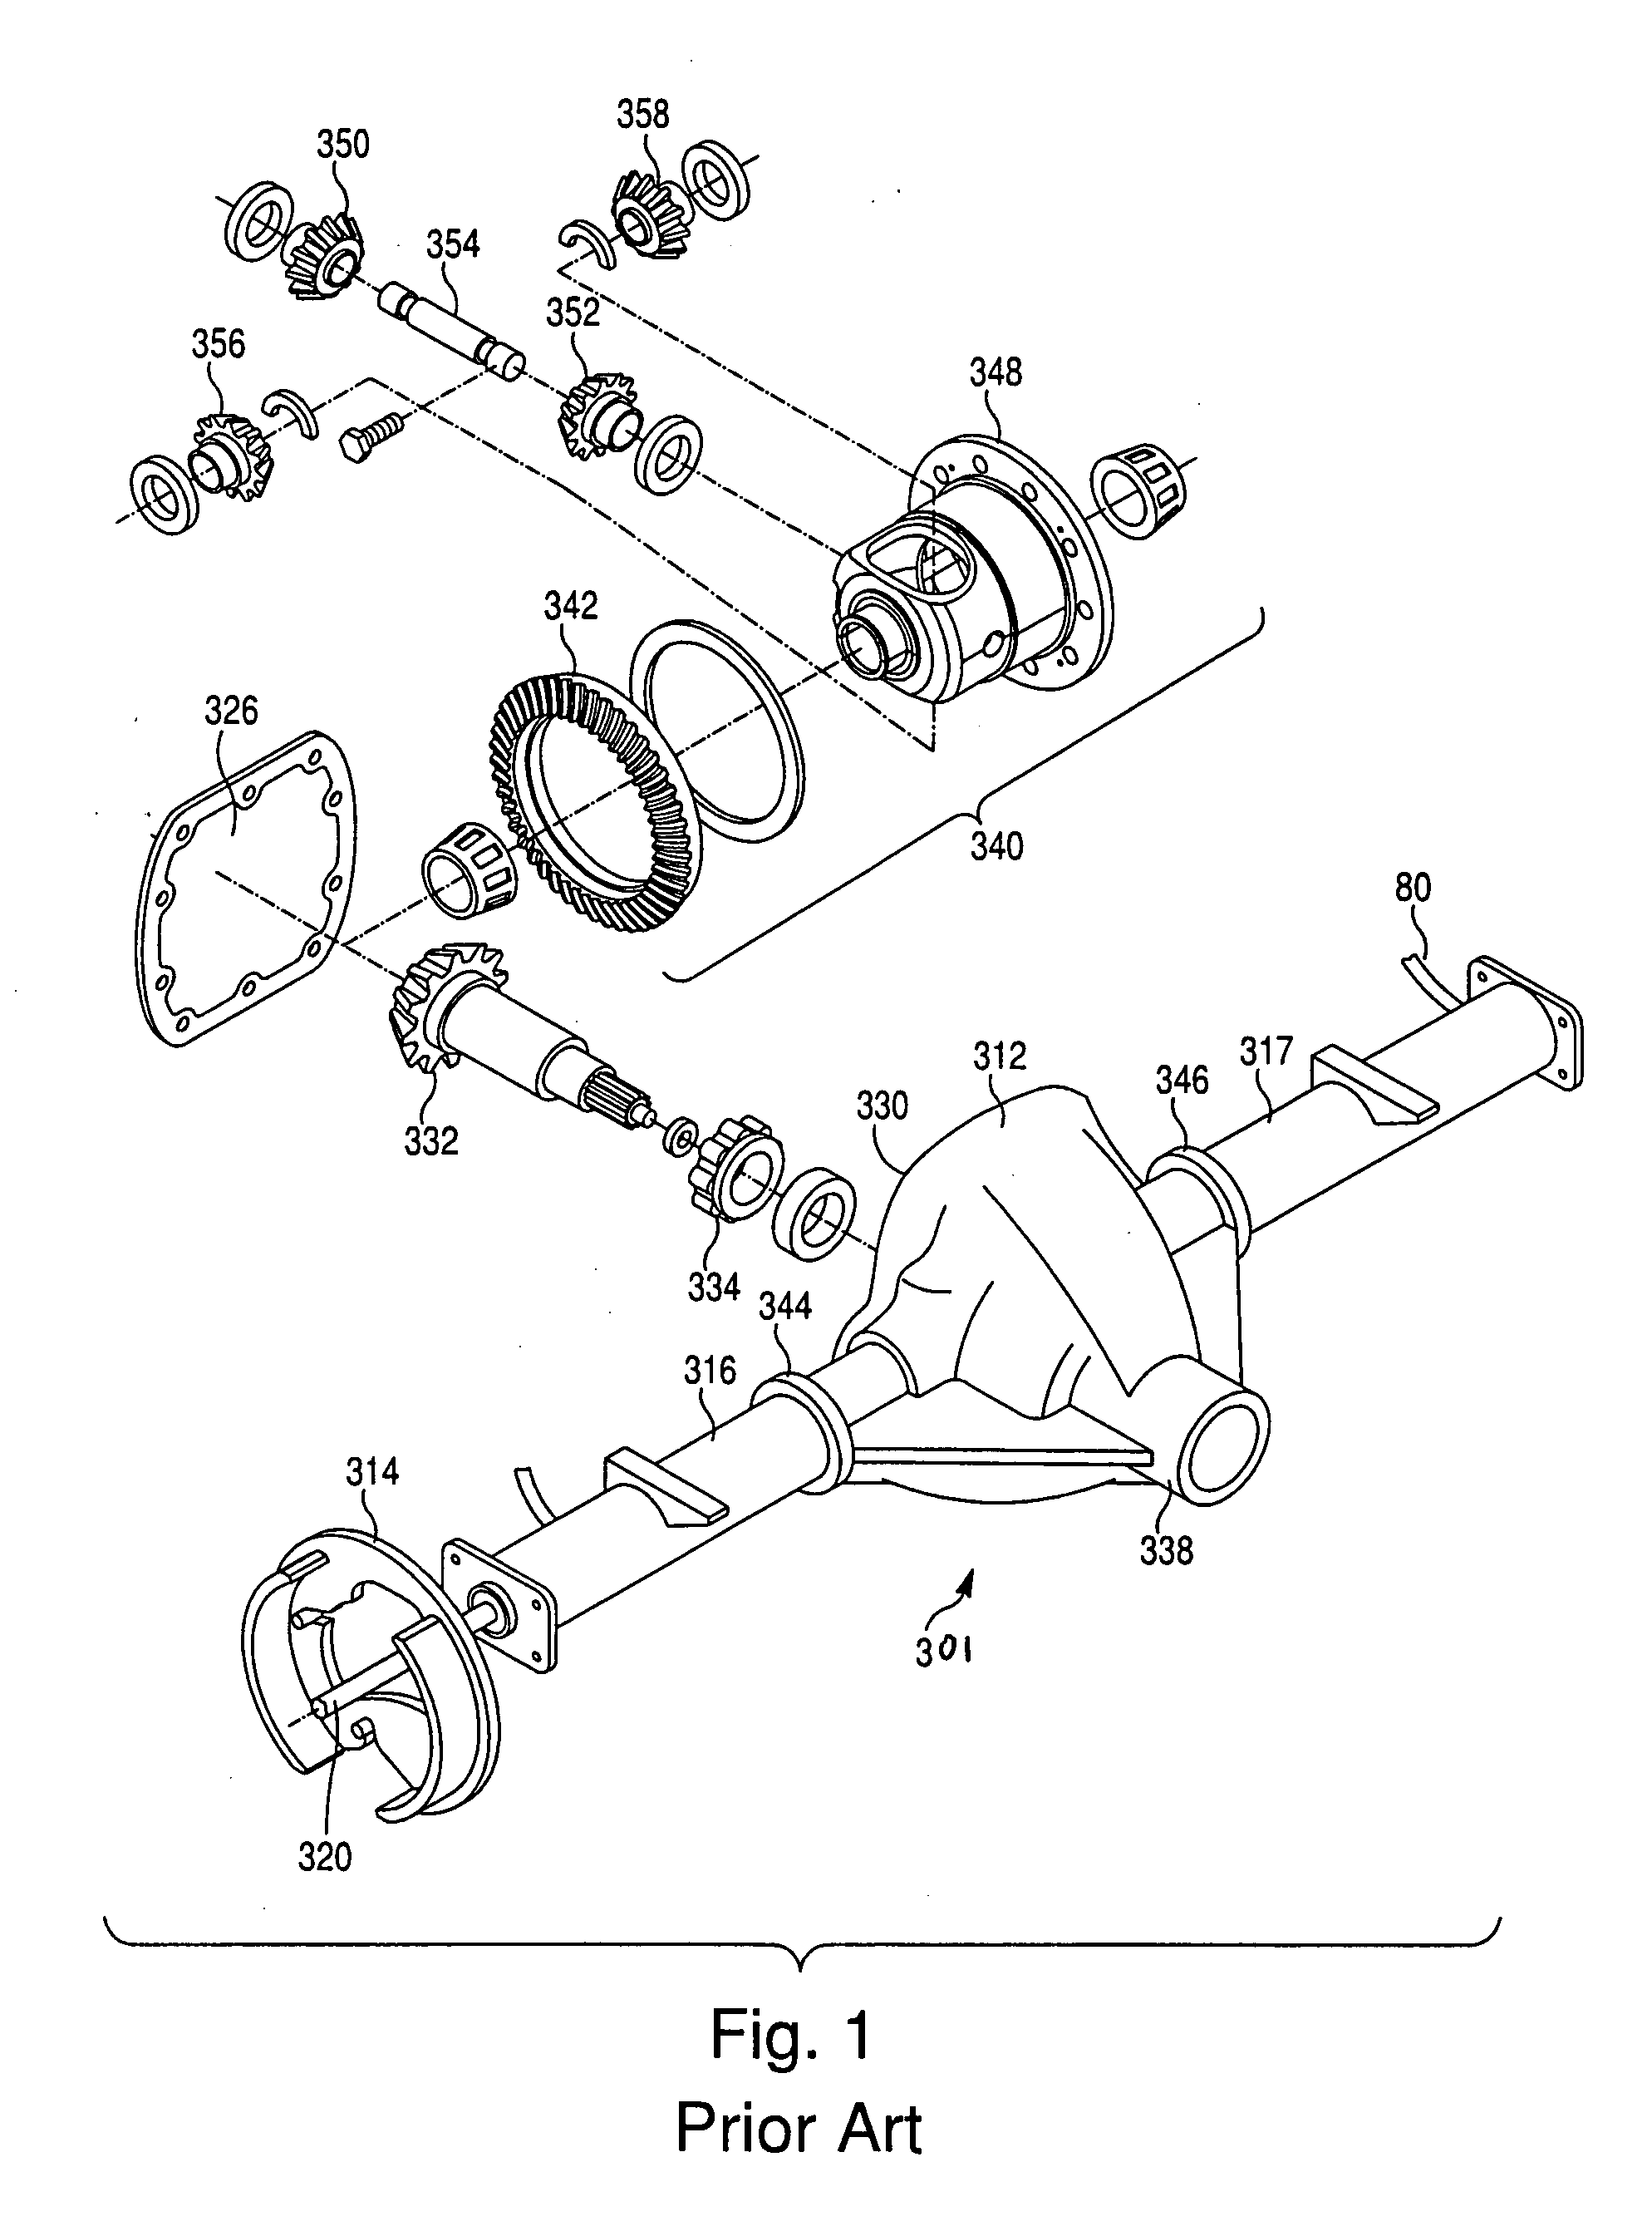 Adjustable flange device for cover member in drive axle assembly